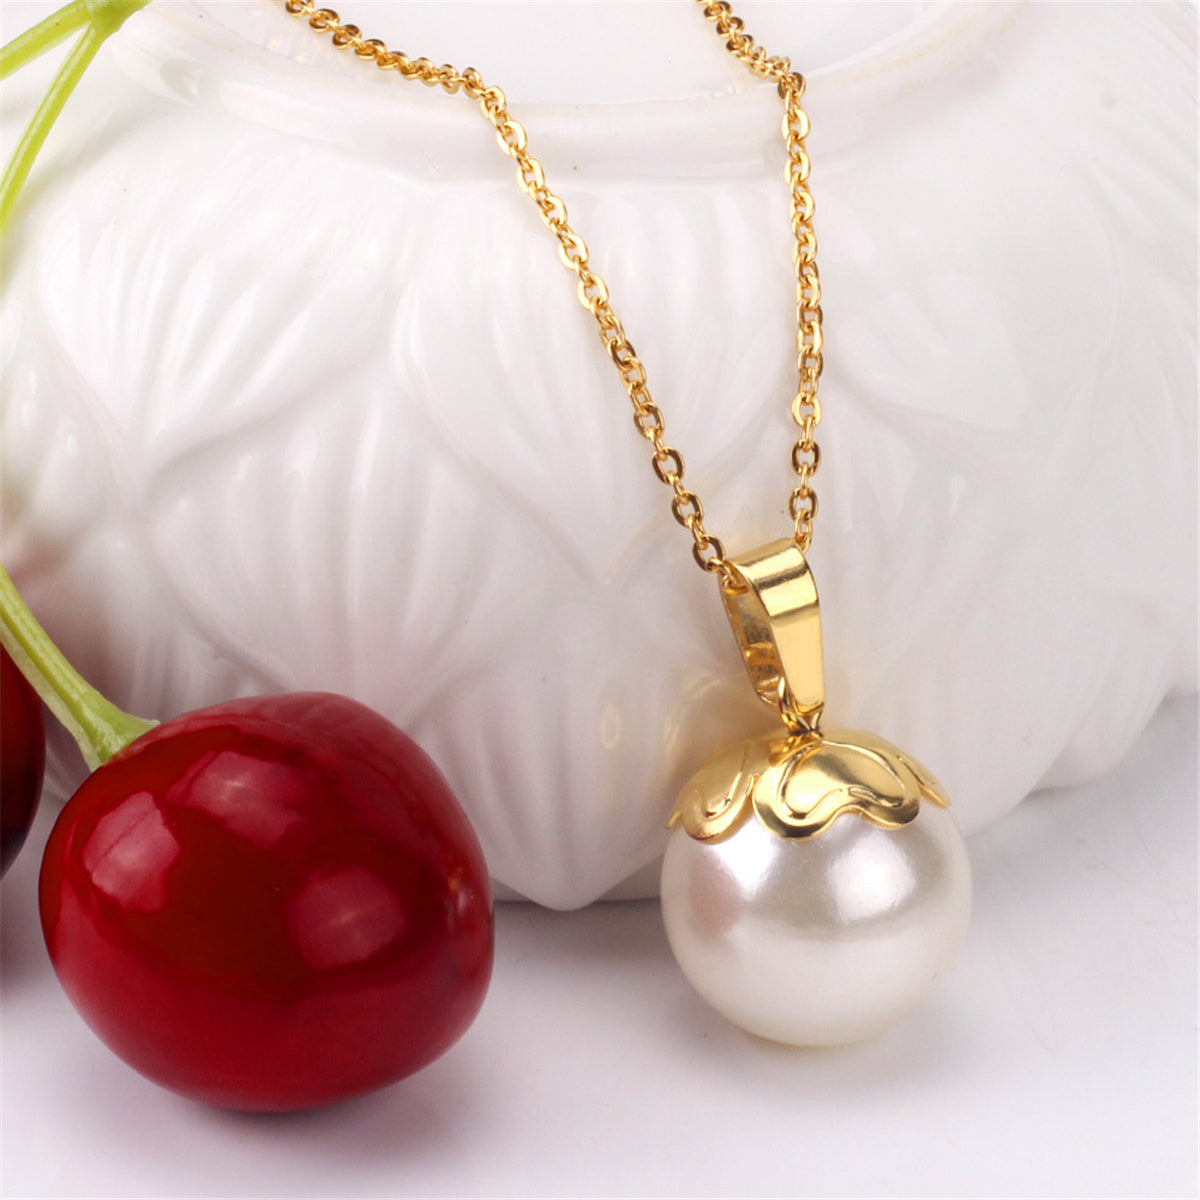 Pearl & 18K Gold-Plated Fruit Drop Earrings & Pendant Necklace